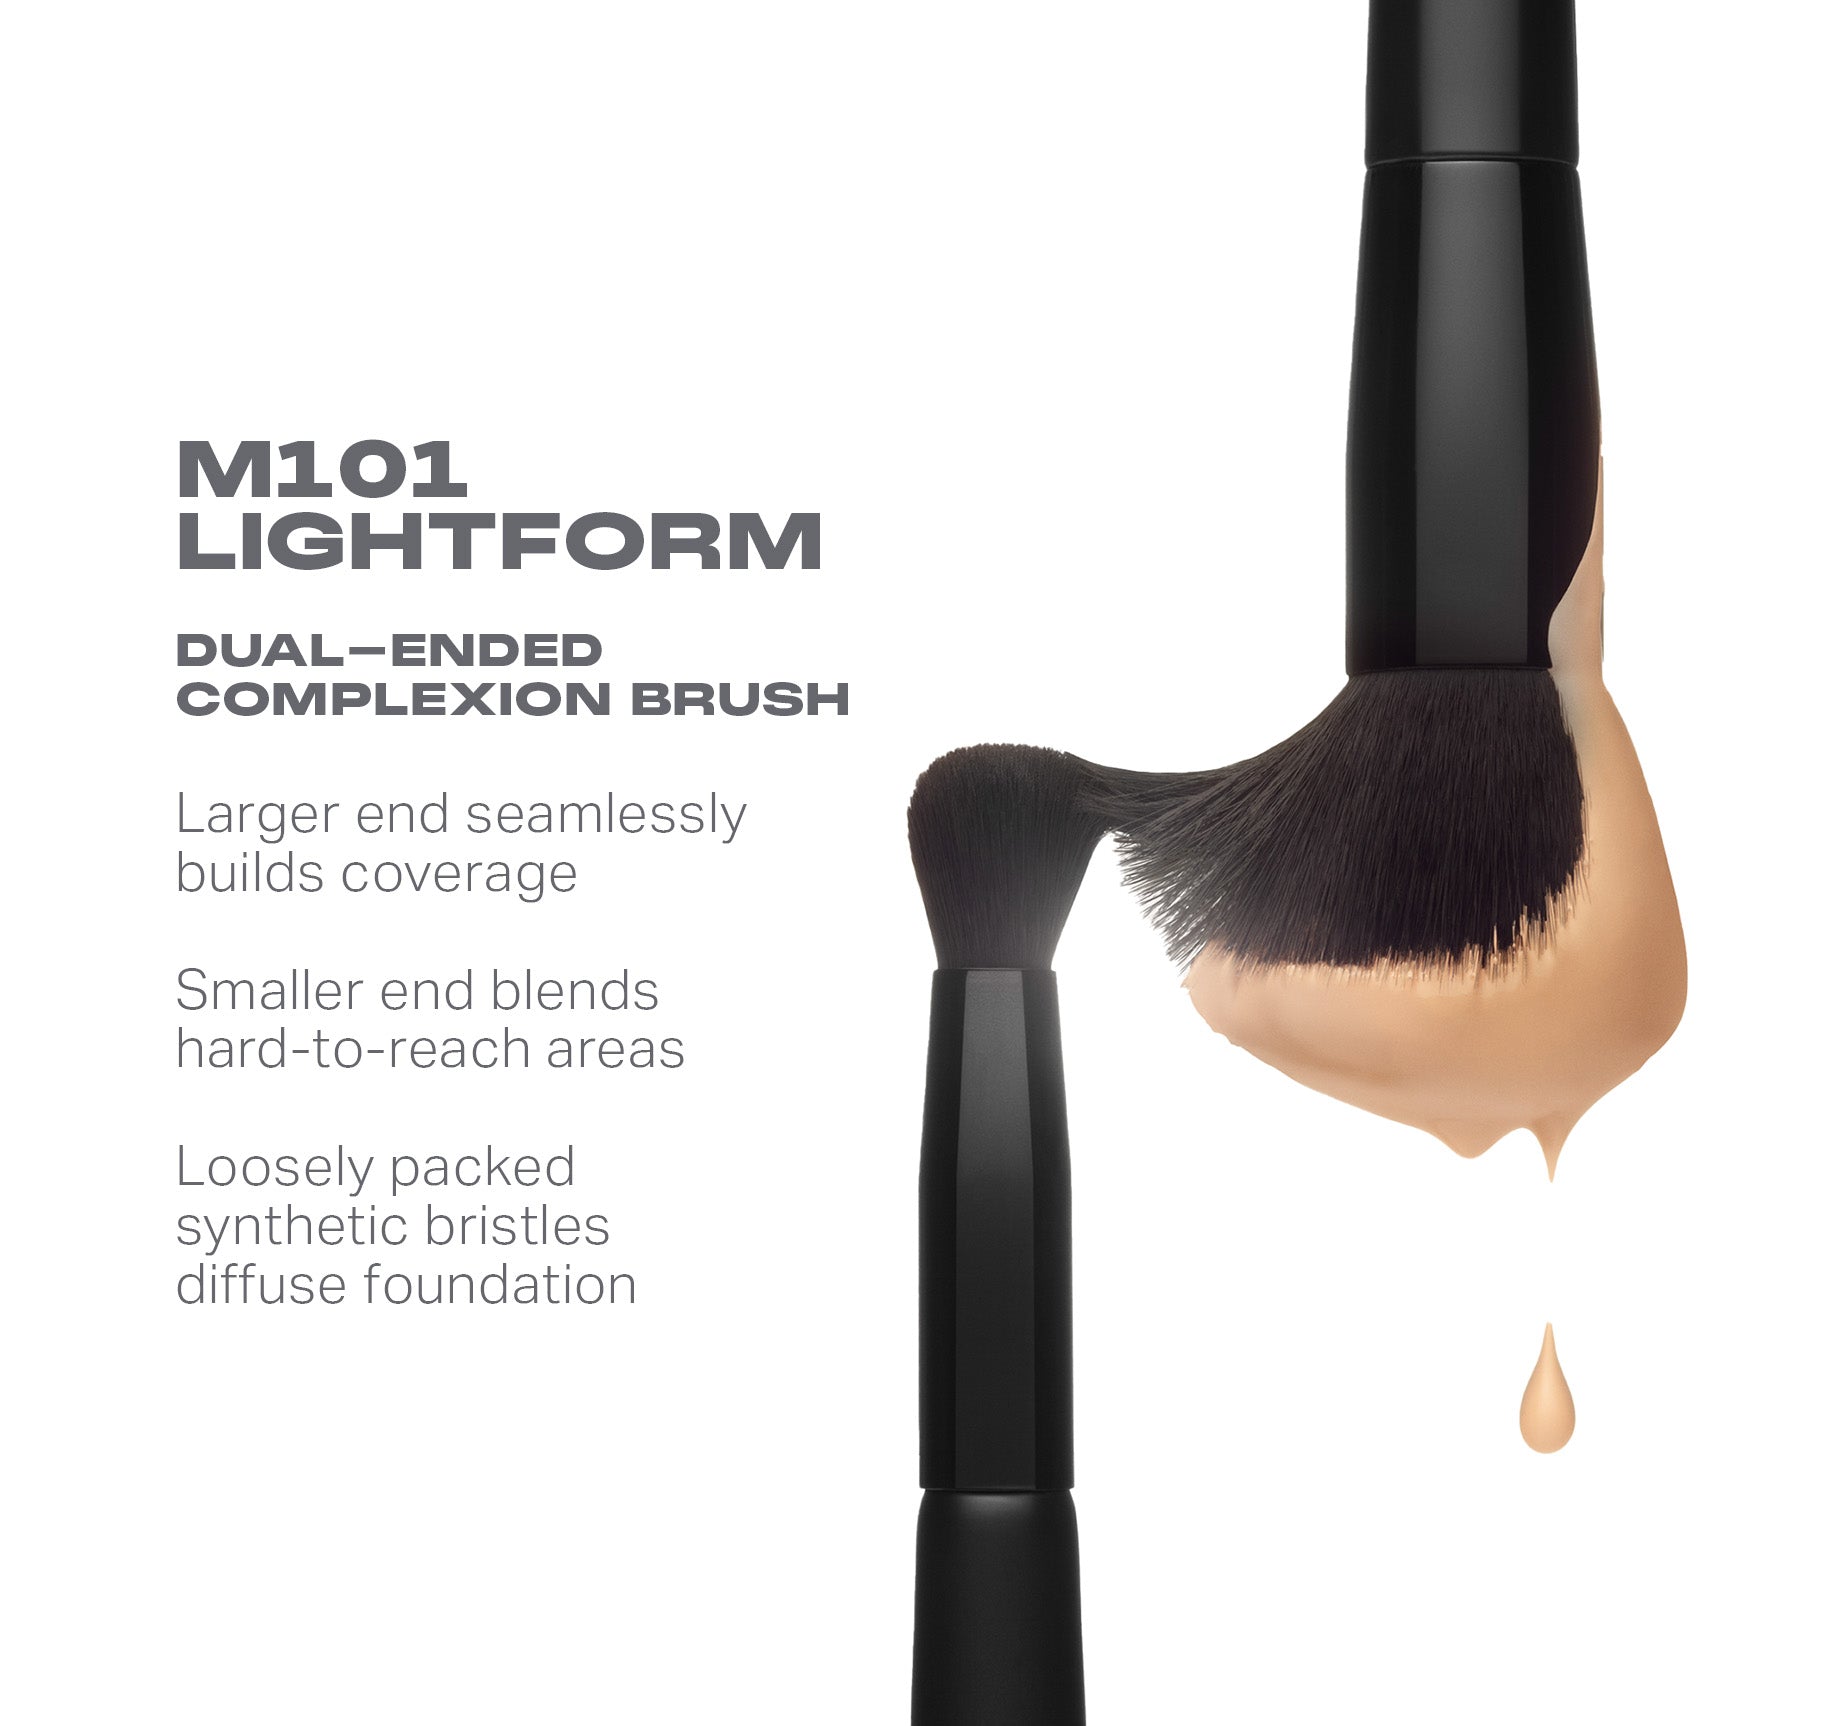 M101 Lightform Dual Ended Complexion Brush - Image 2